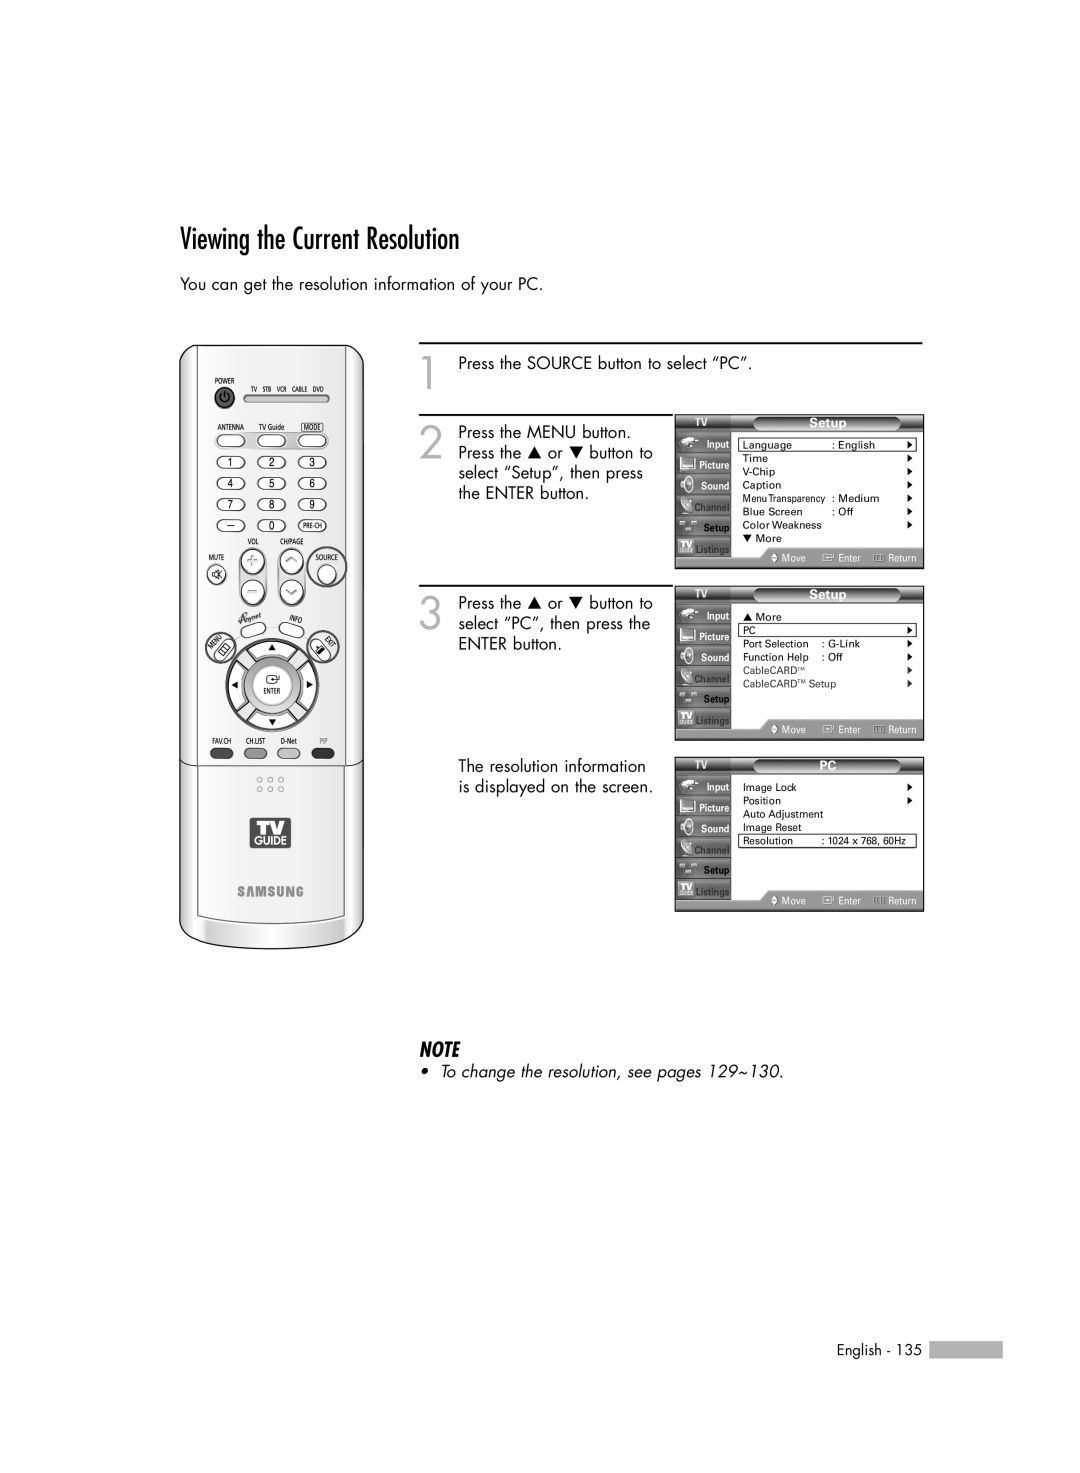 Samsung HL-R5688W manual Viewing the Current Resolution, To change the resolution, see pages 129~130 